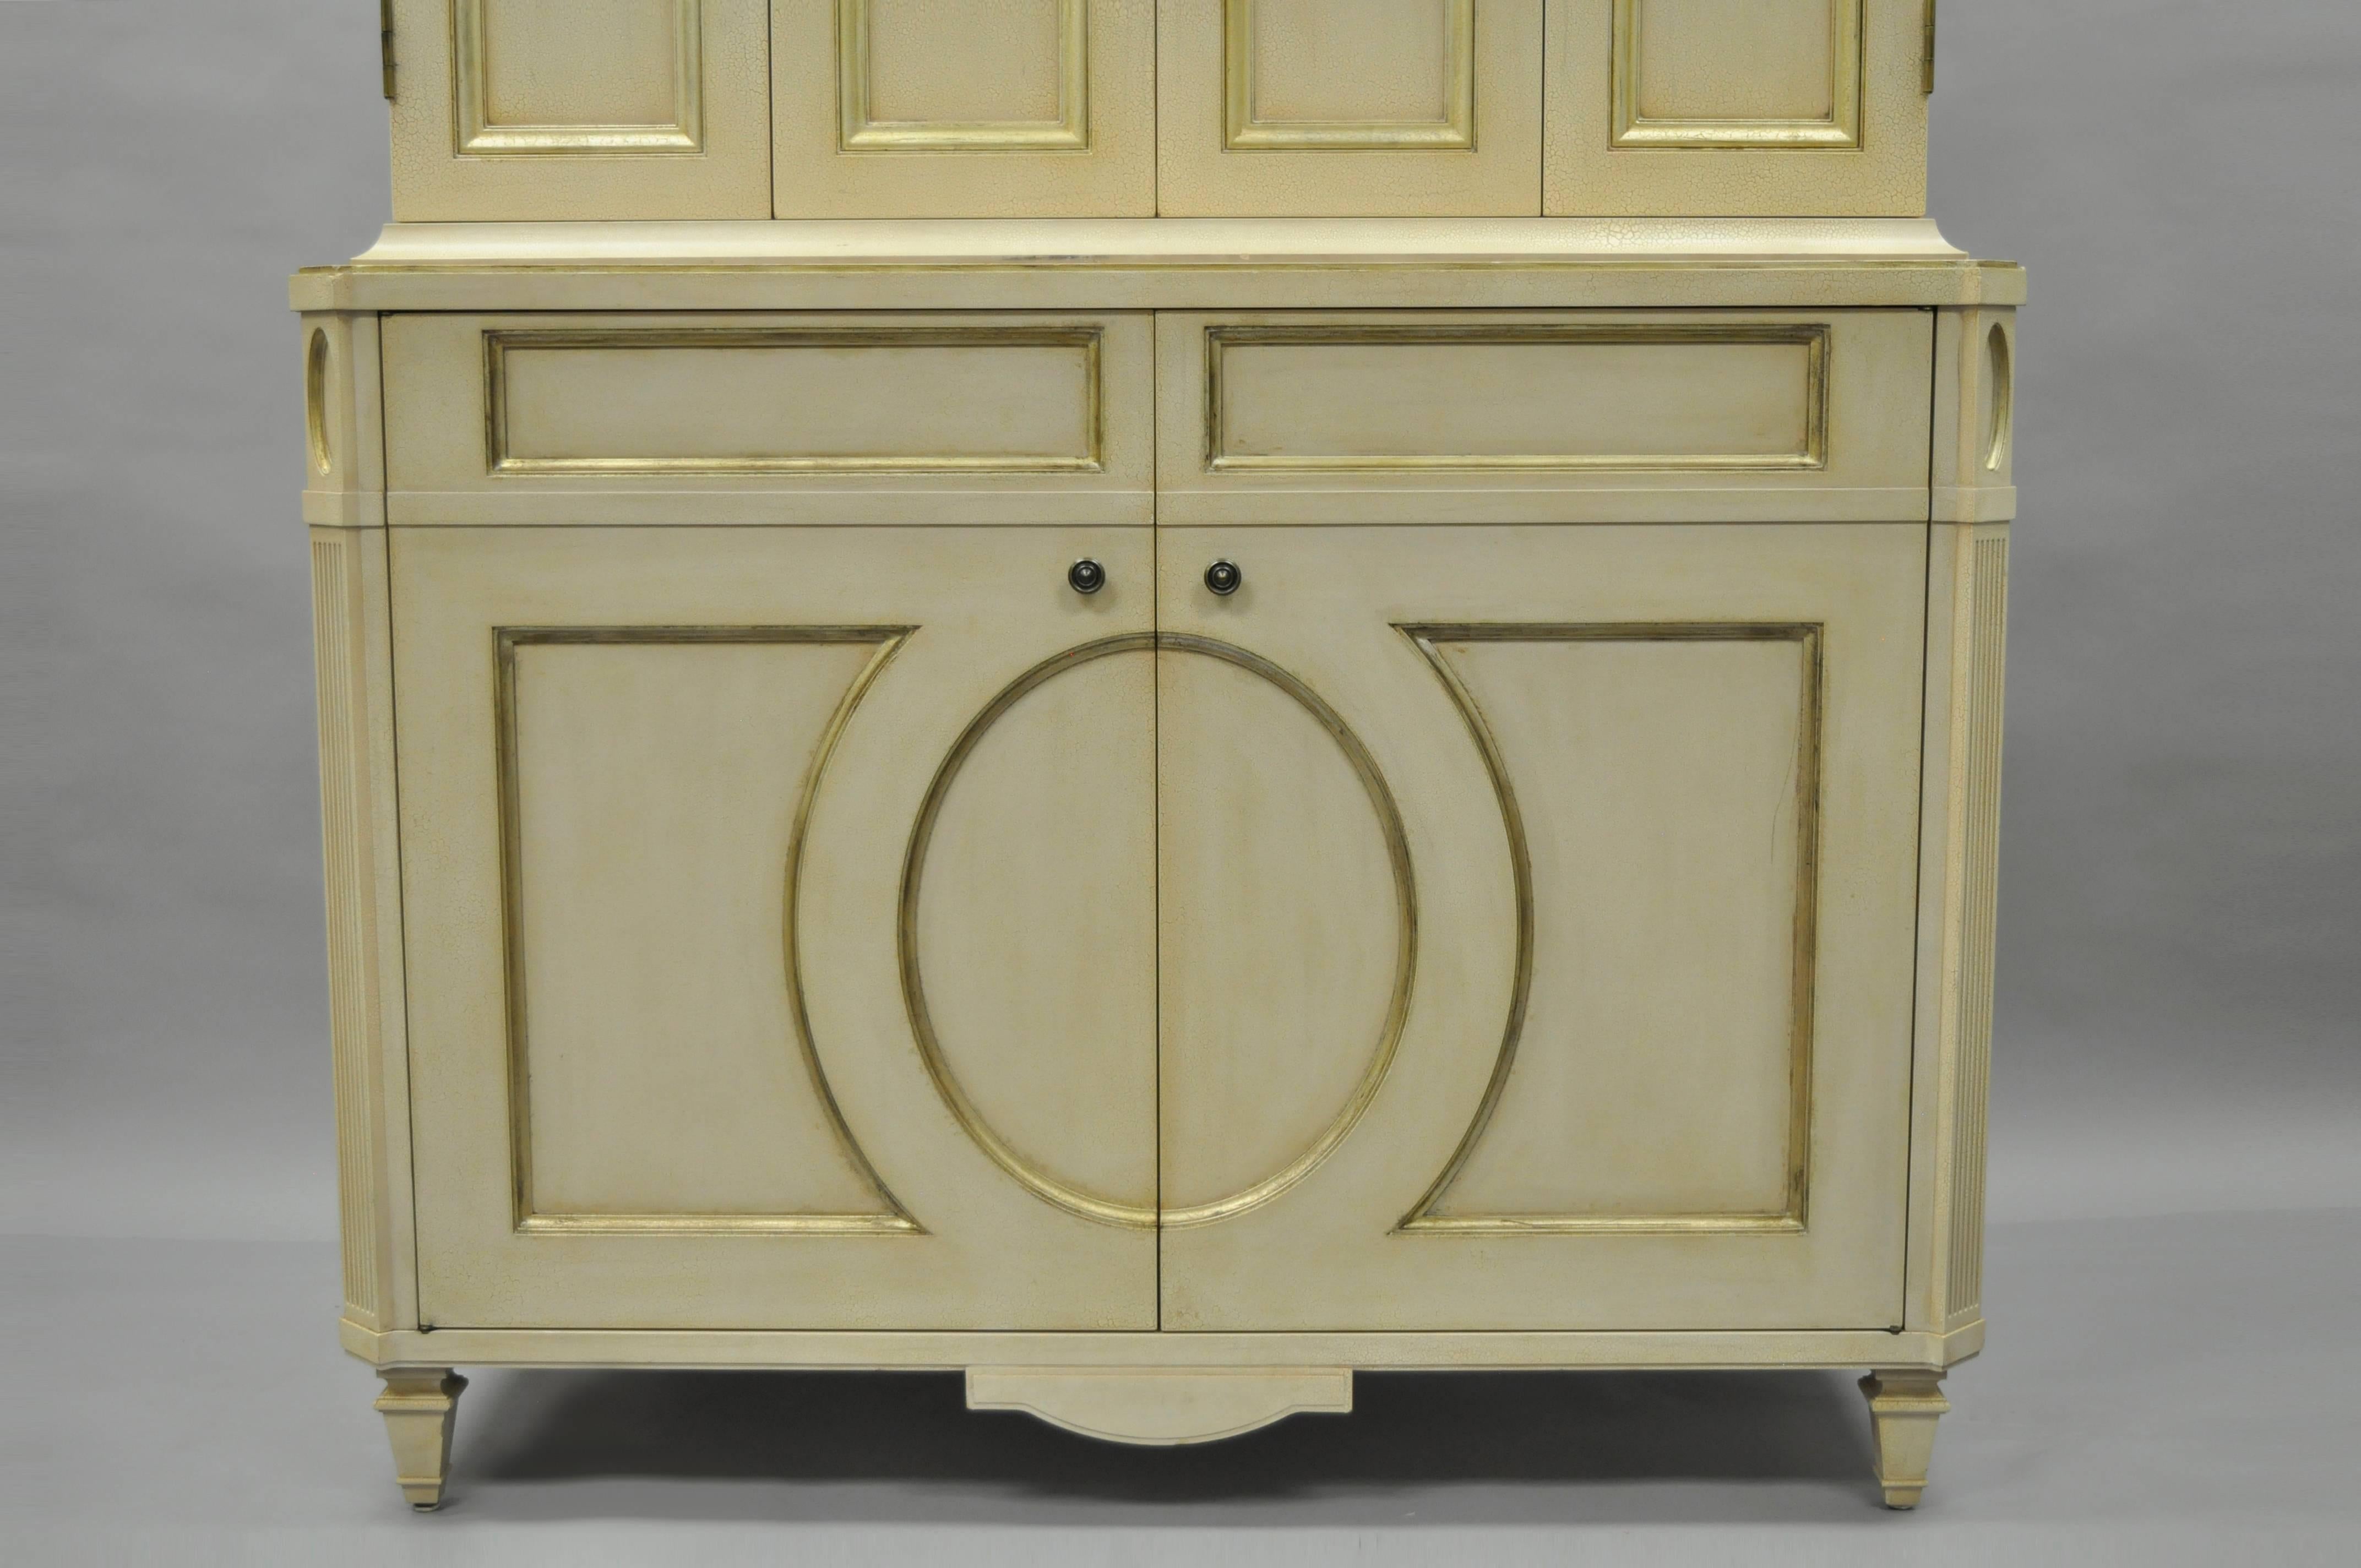 French Neoclassical Louis XVI Style Cream & Gold Painted Bar Cabinet by Decca A In Good Condition For Sale In Philadelphia, PA